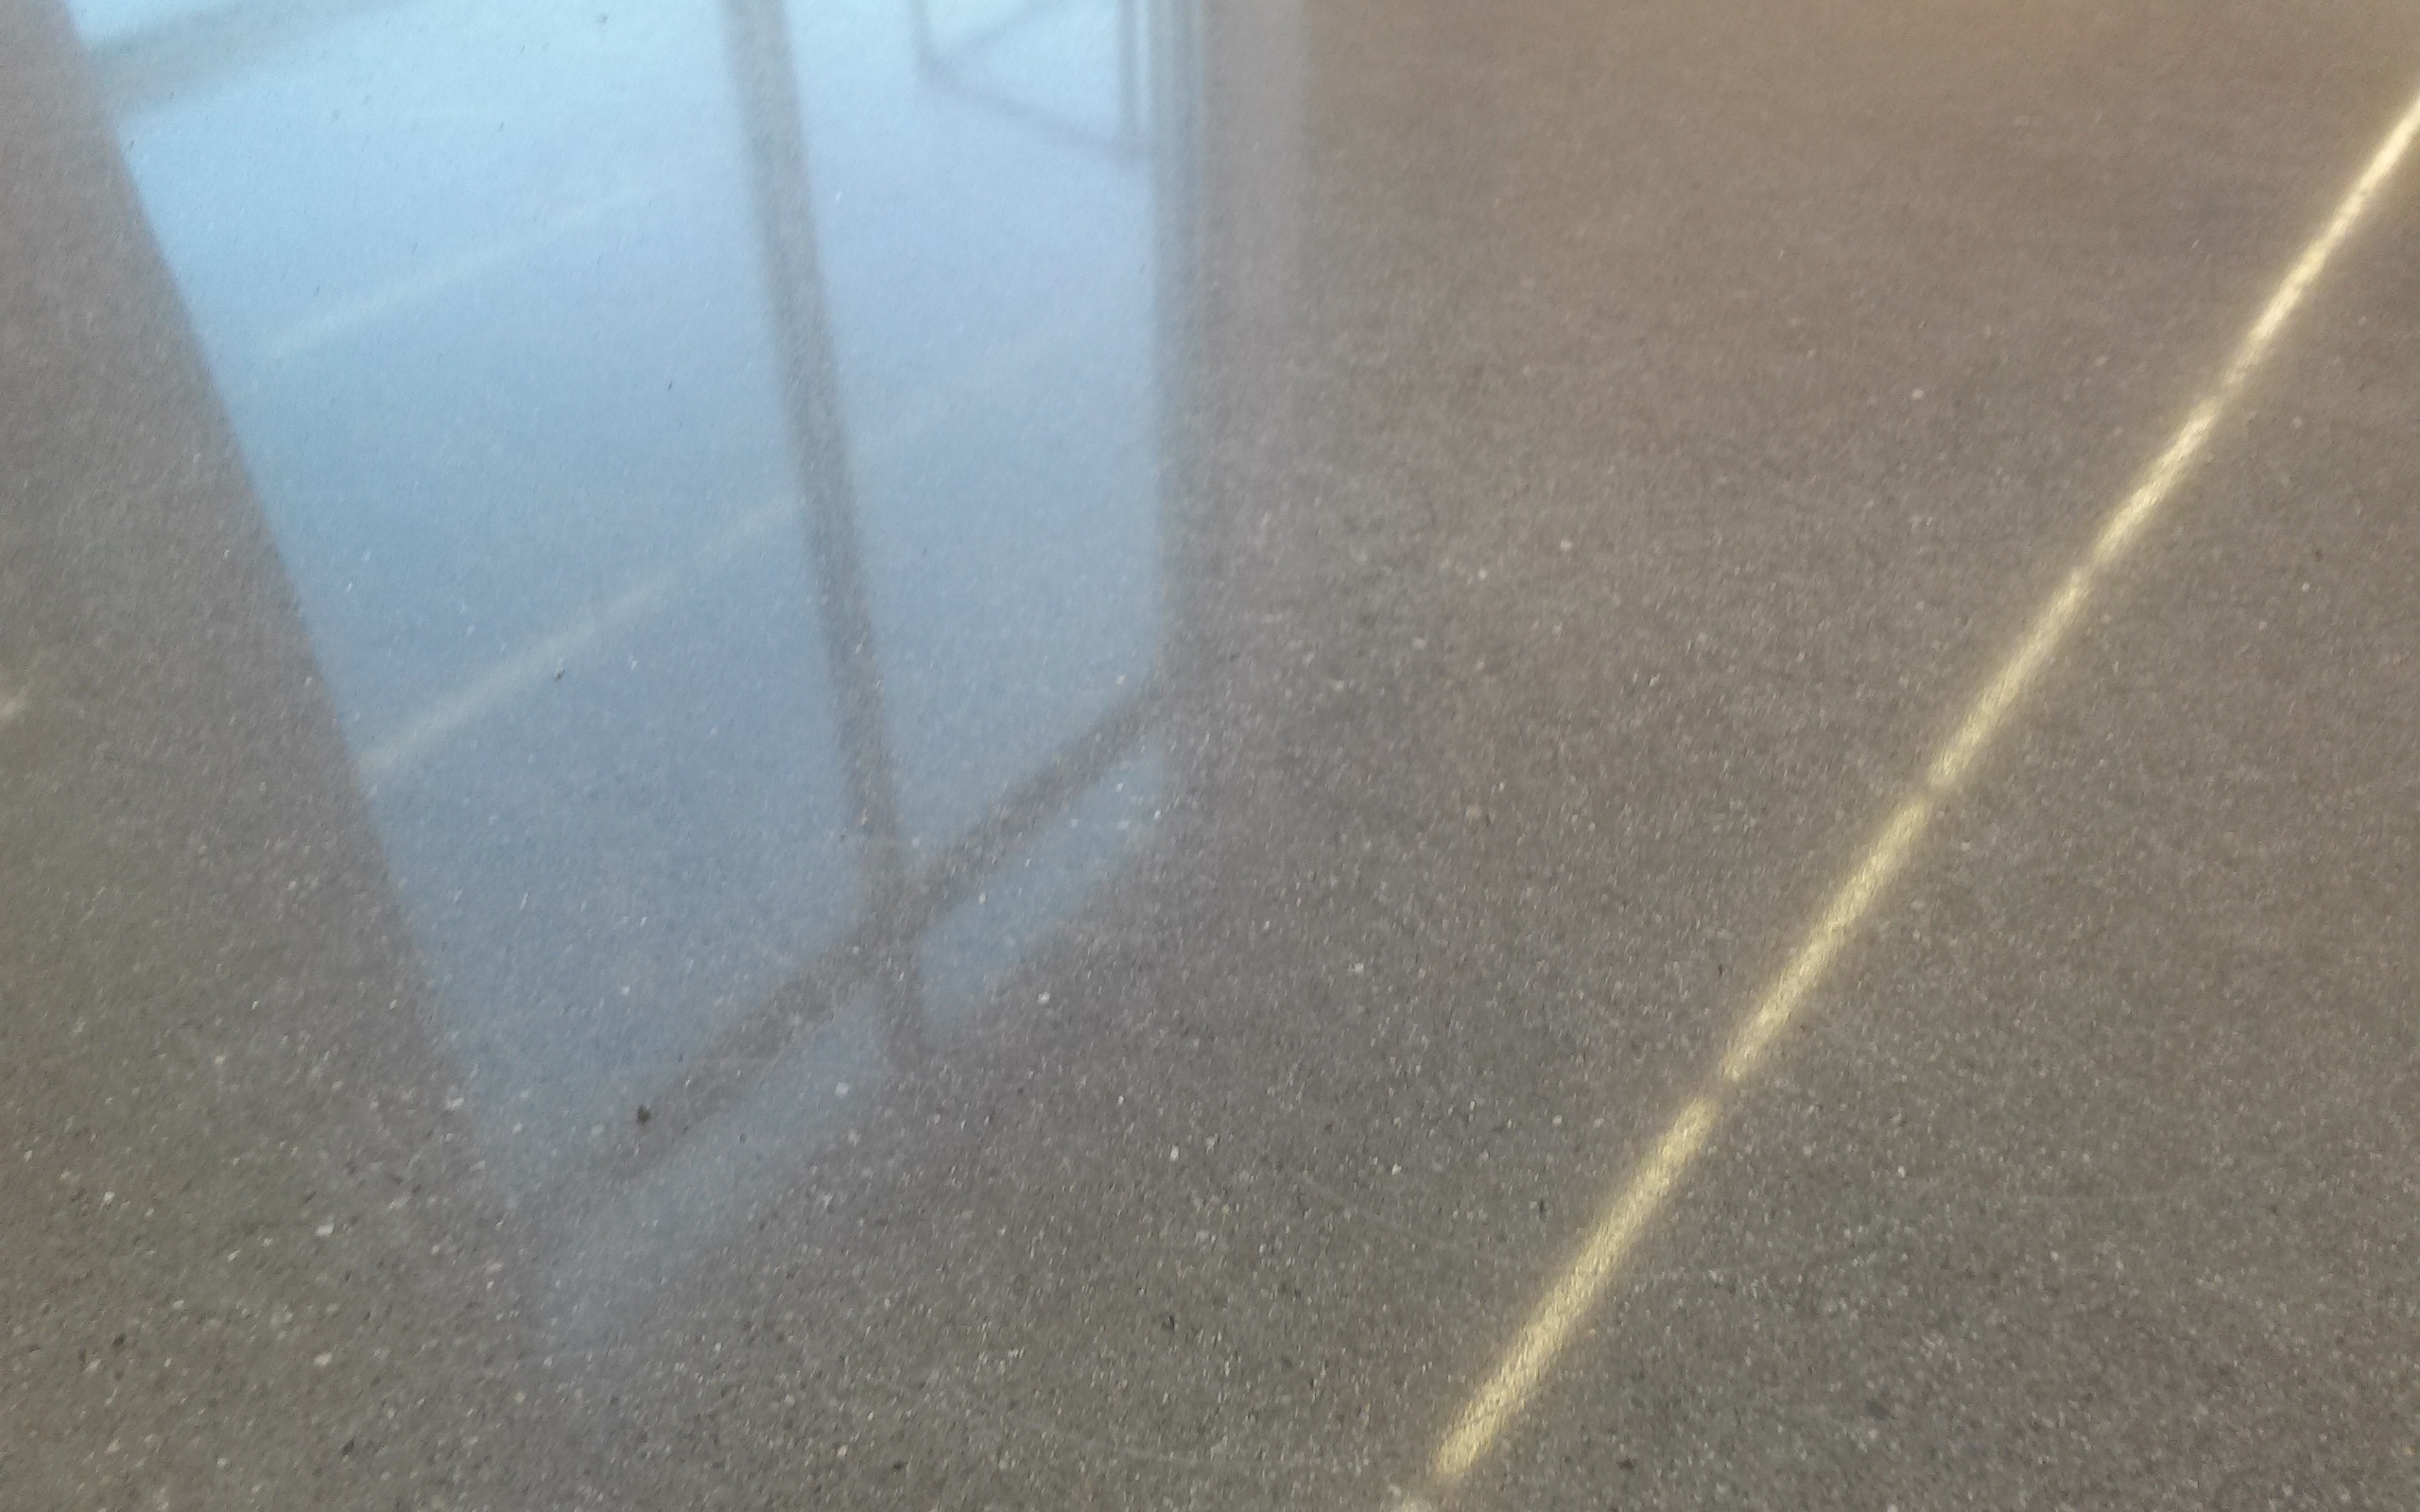 Sunlight from the window reflects off a polished concrete floor.